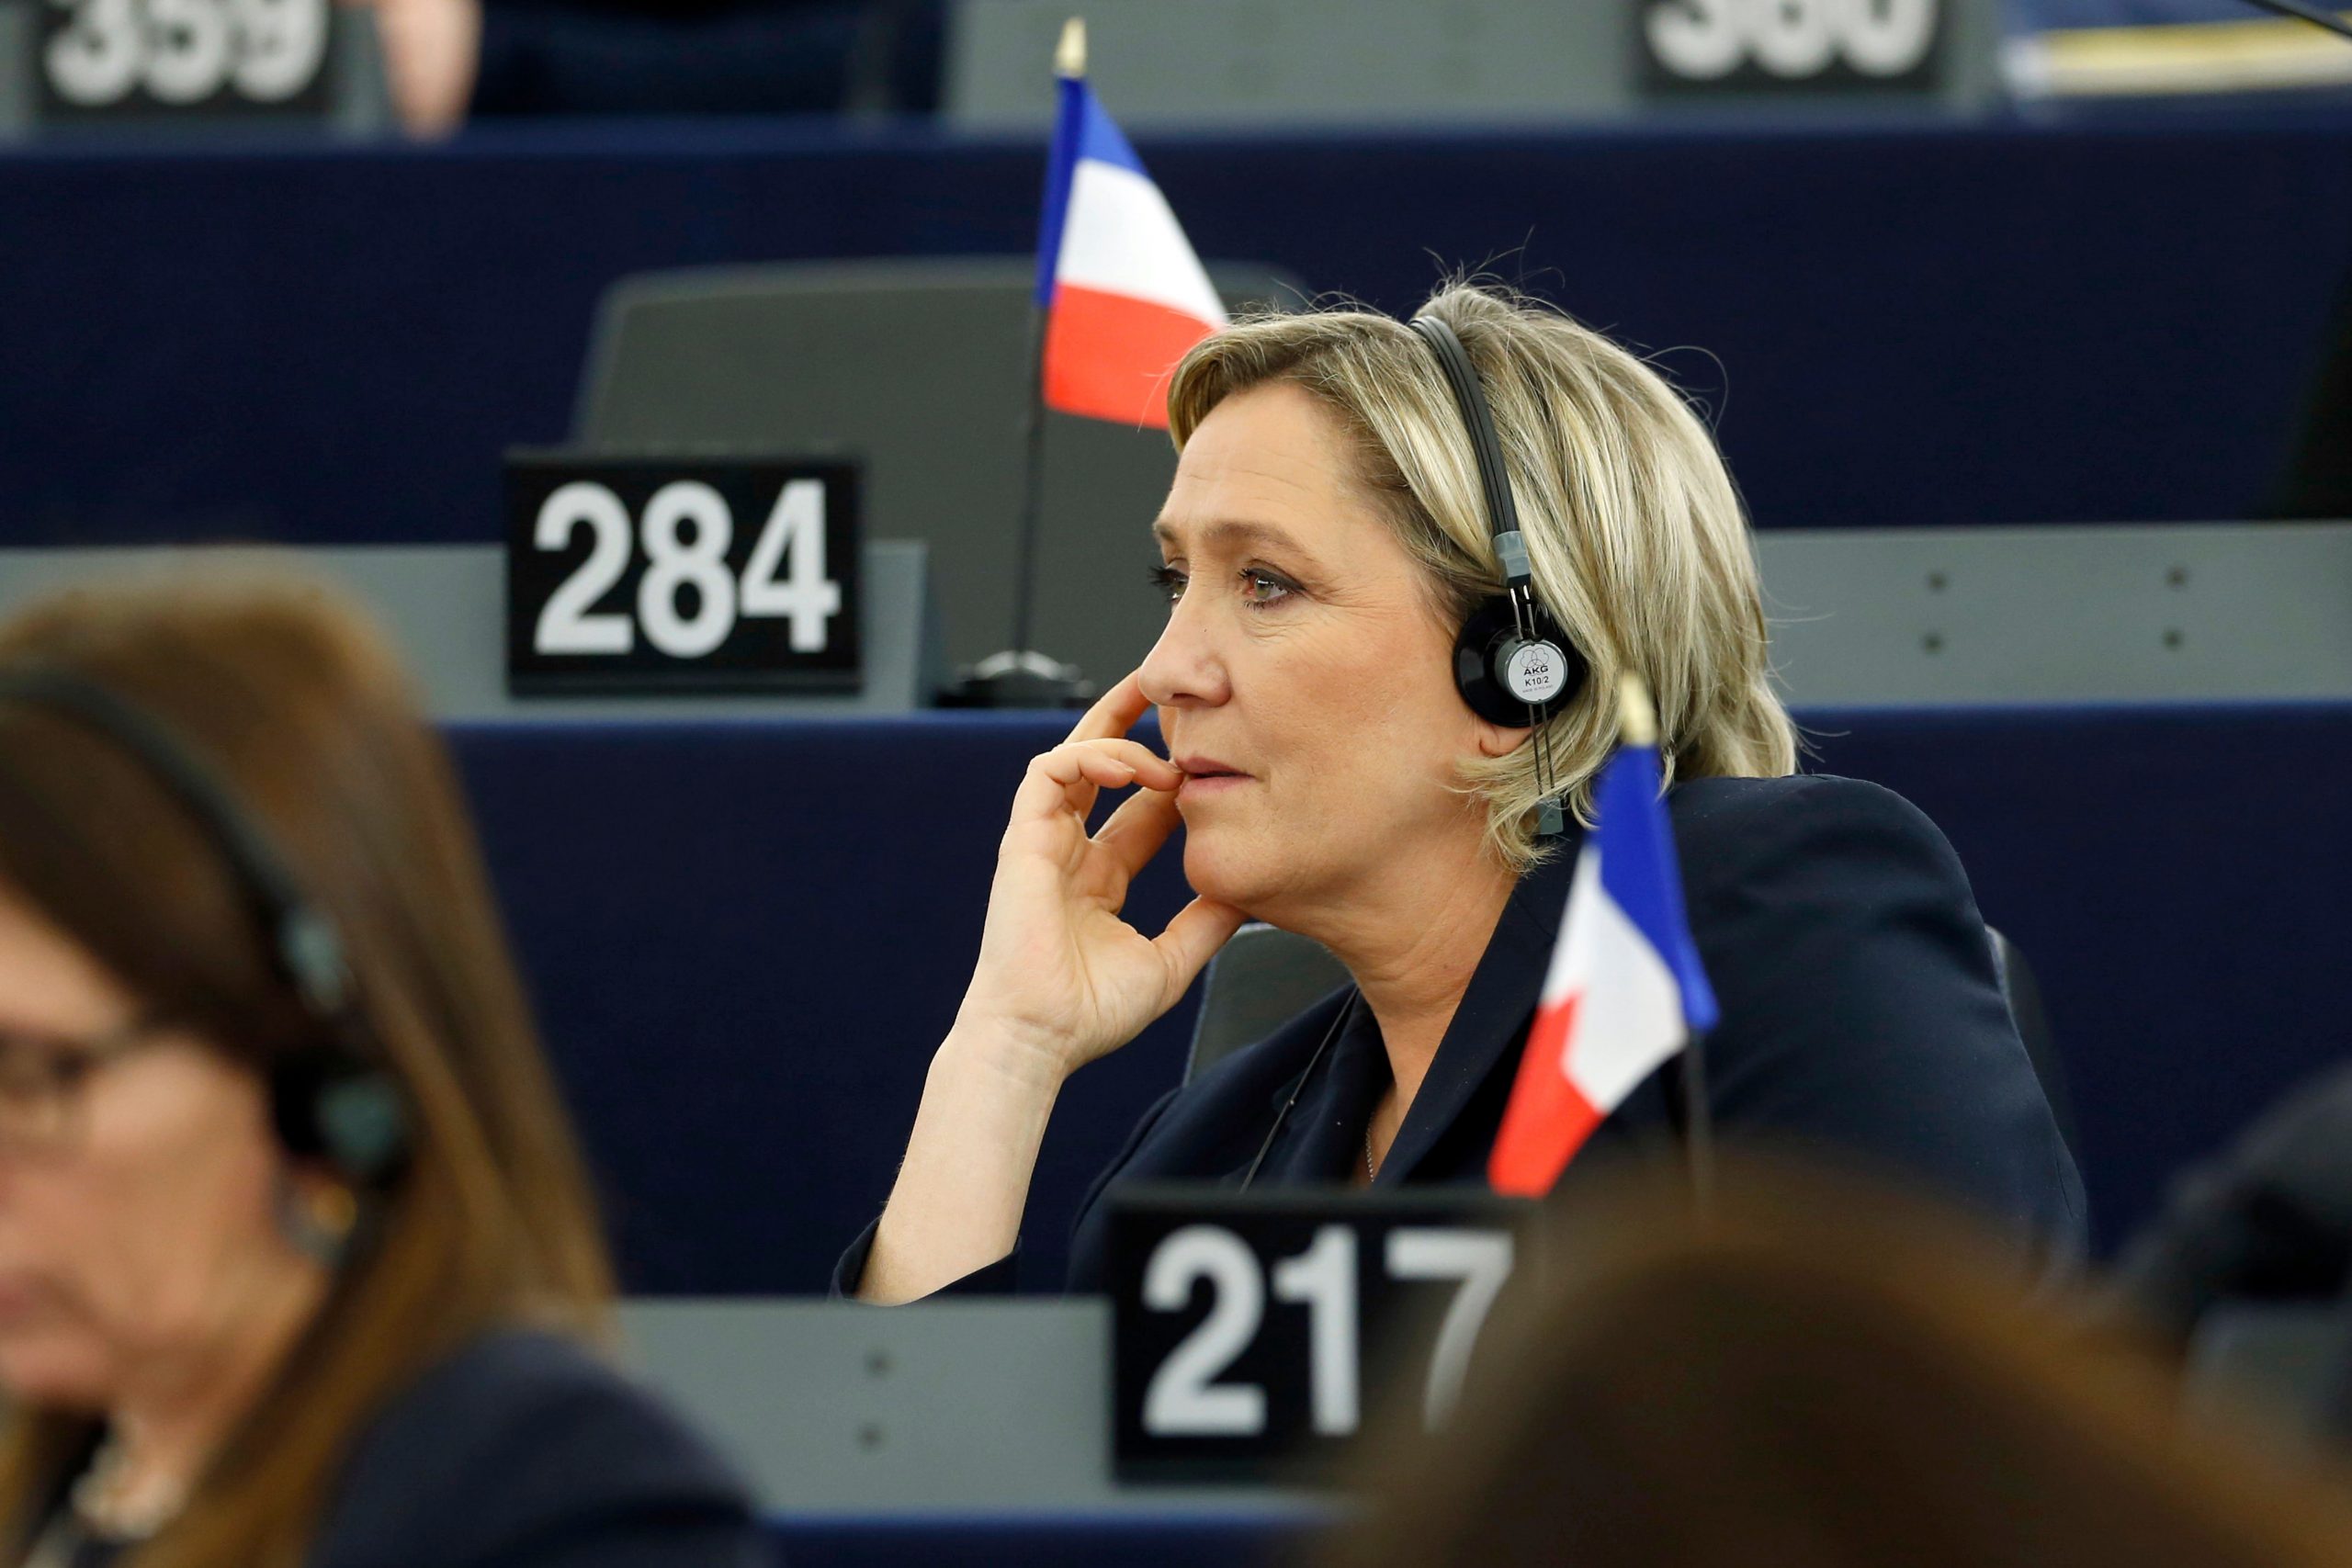 EU fraud agency investigating French far-right candidate Marine Le Pen